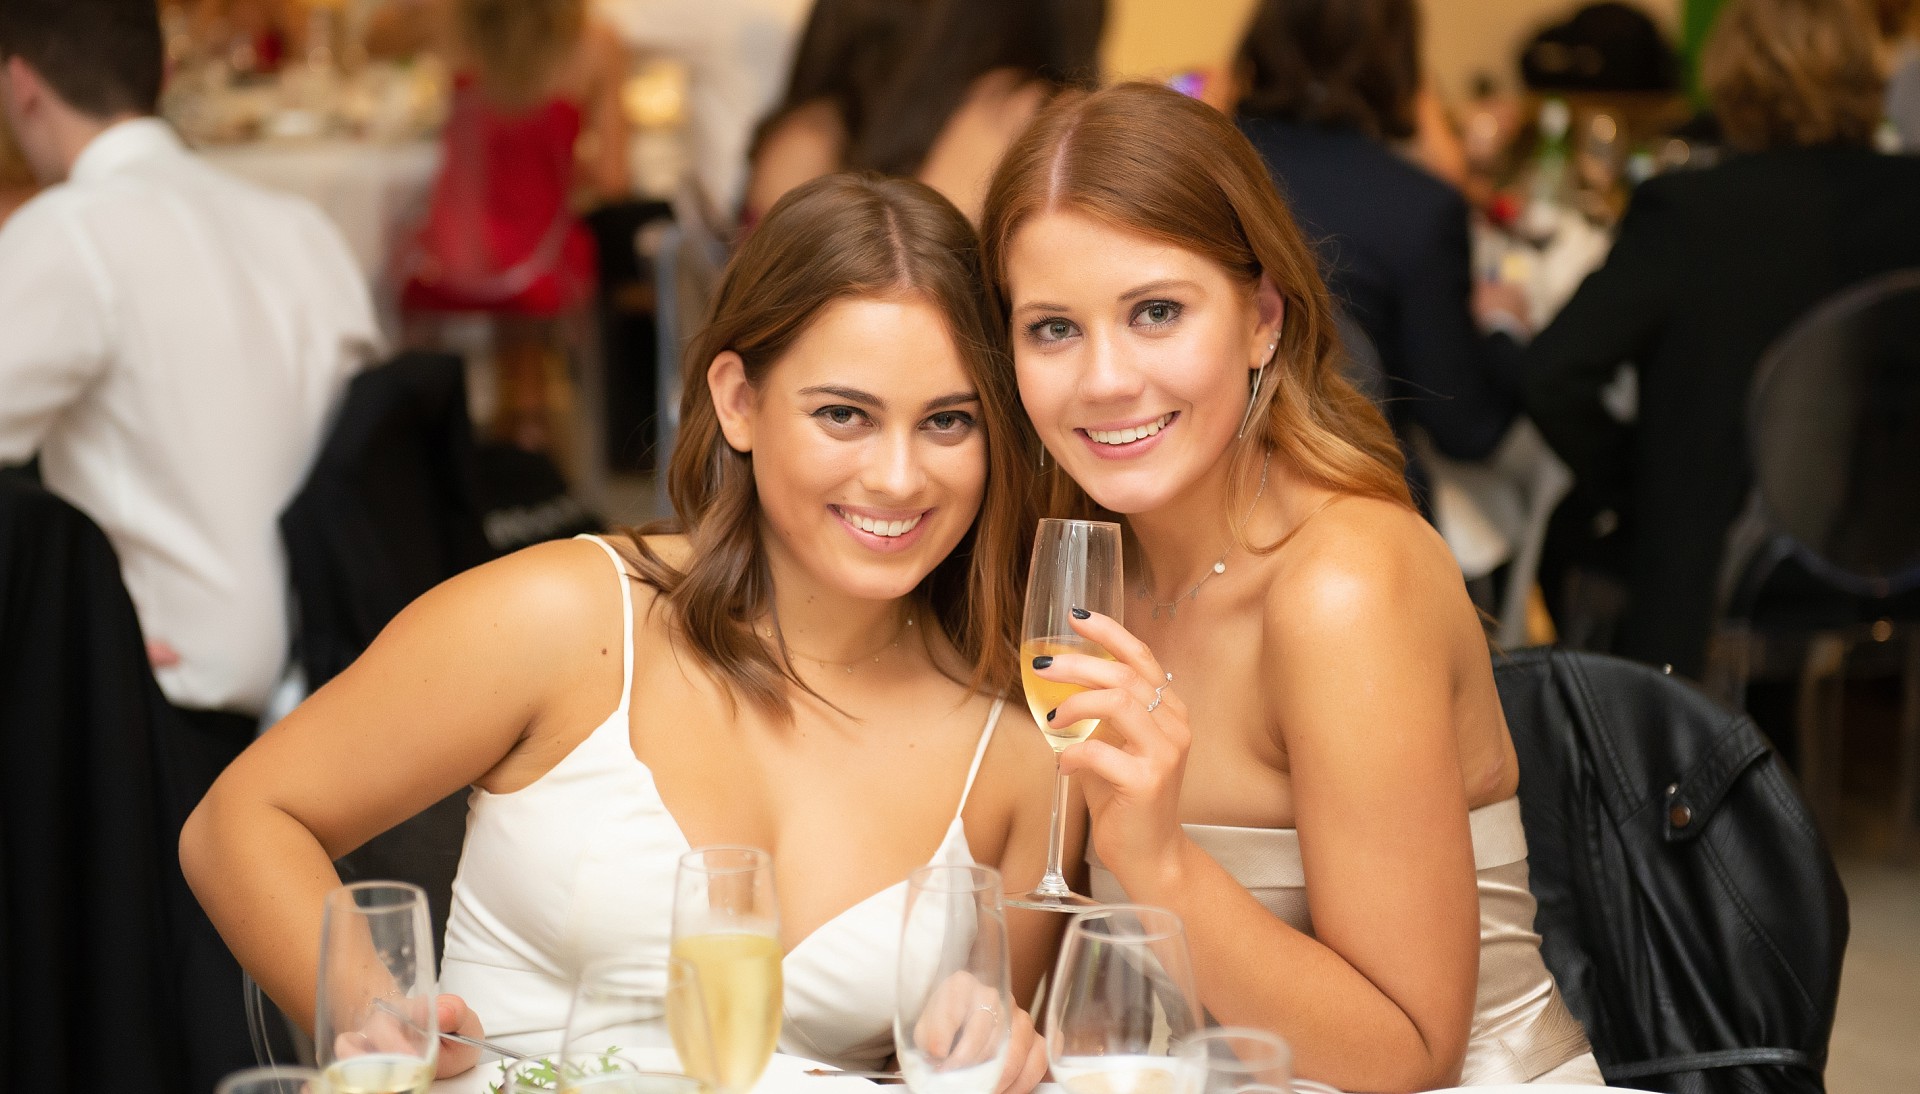 Guests at dinner party with champagne in Event Photography Sydney